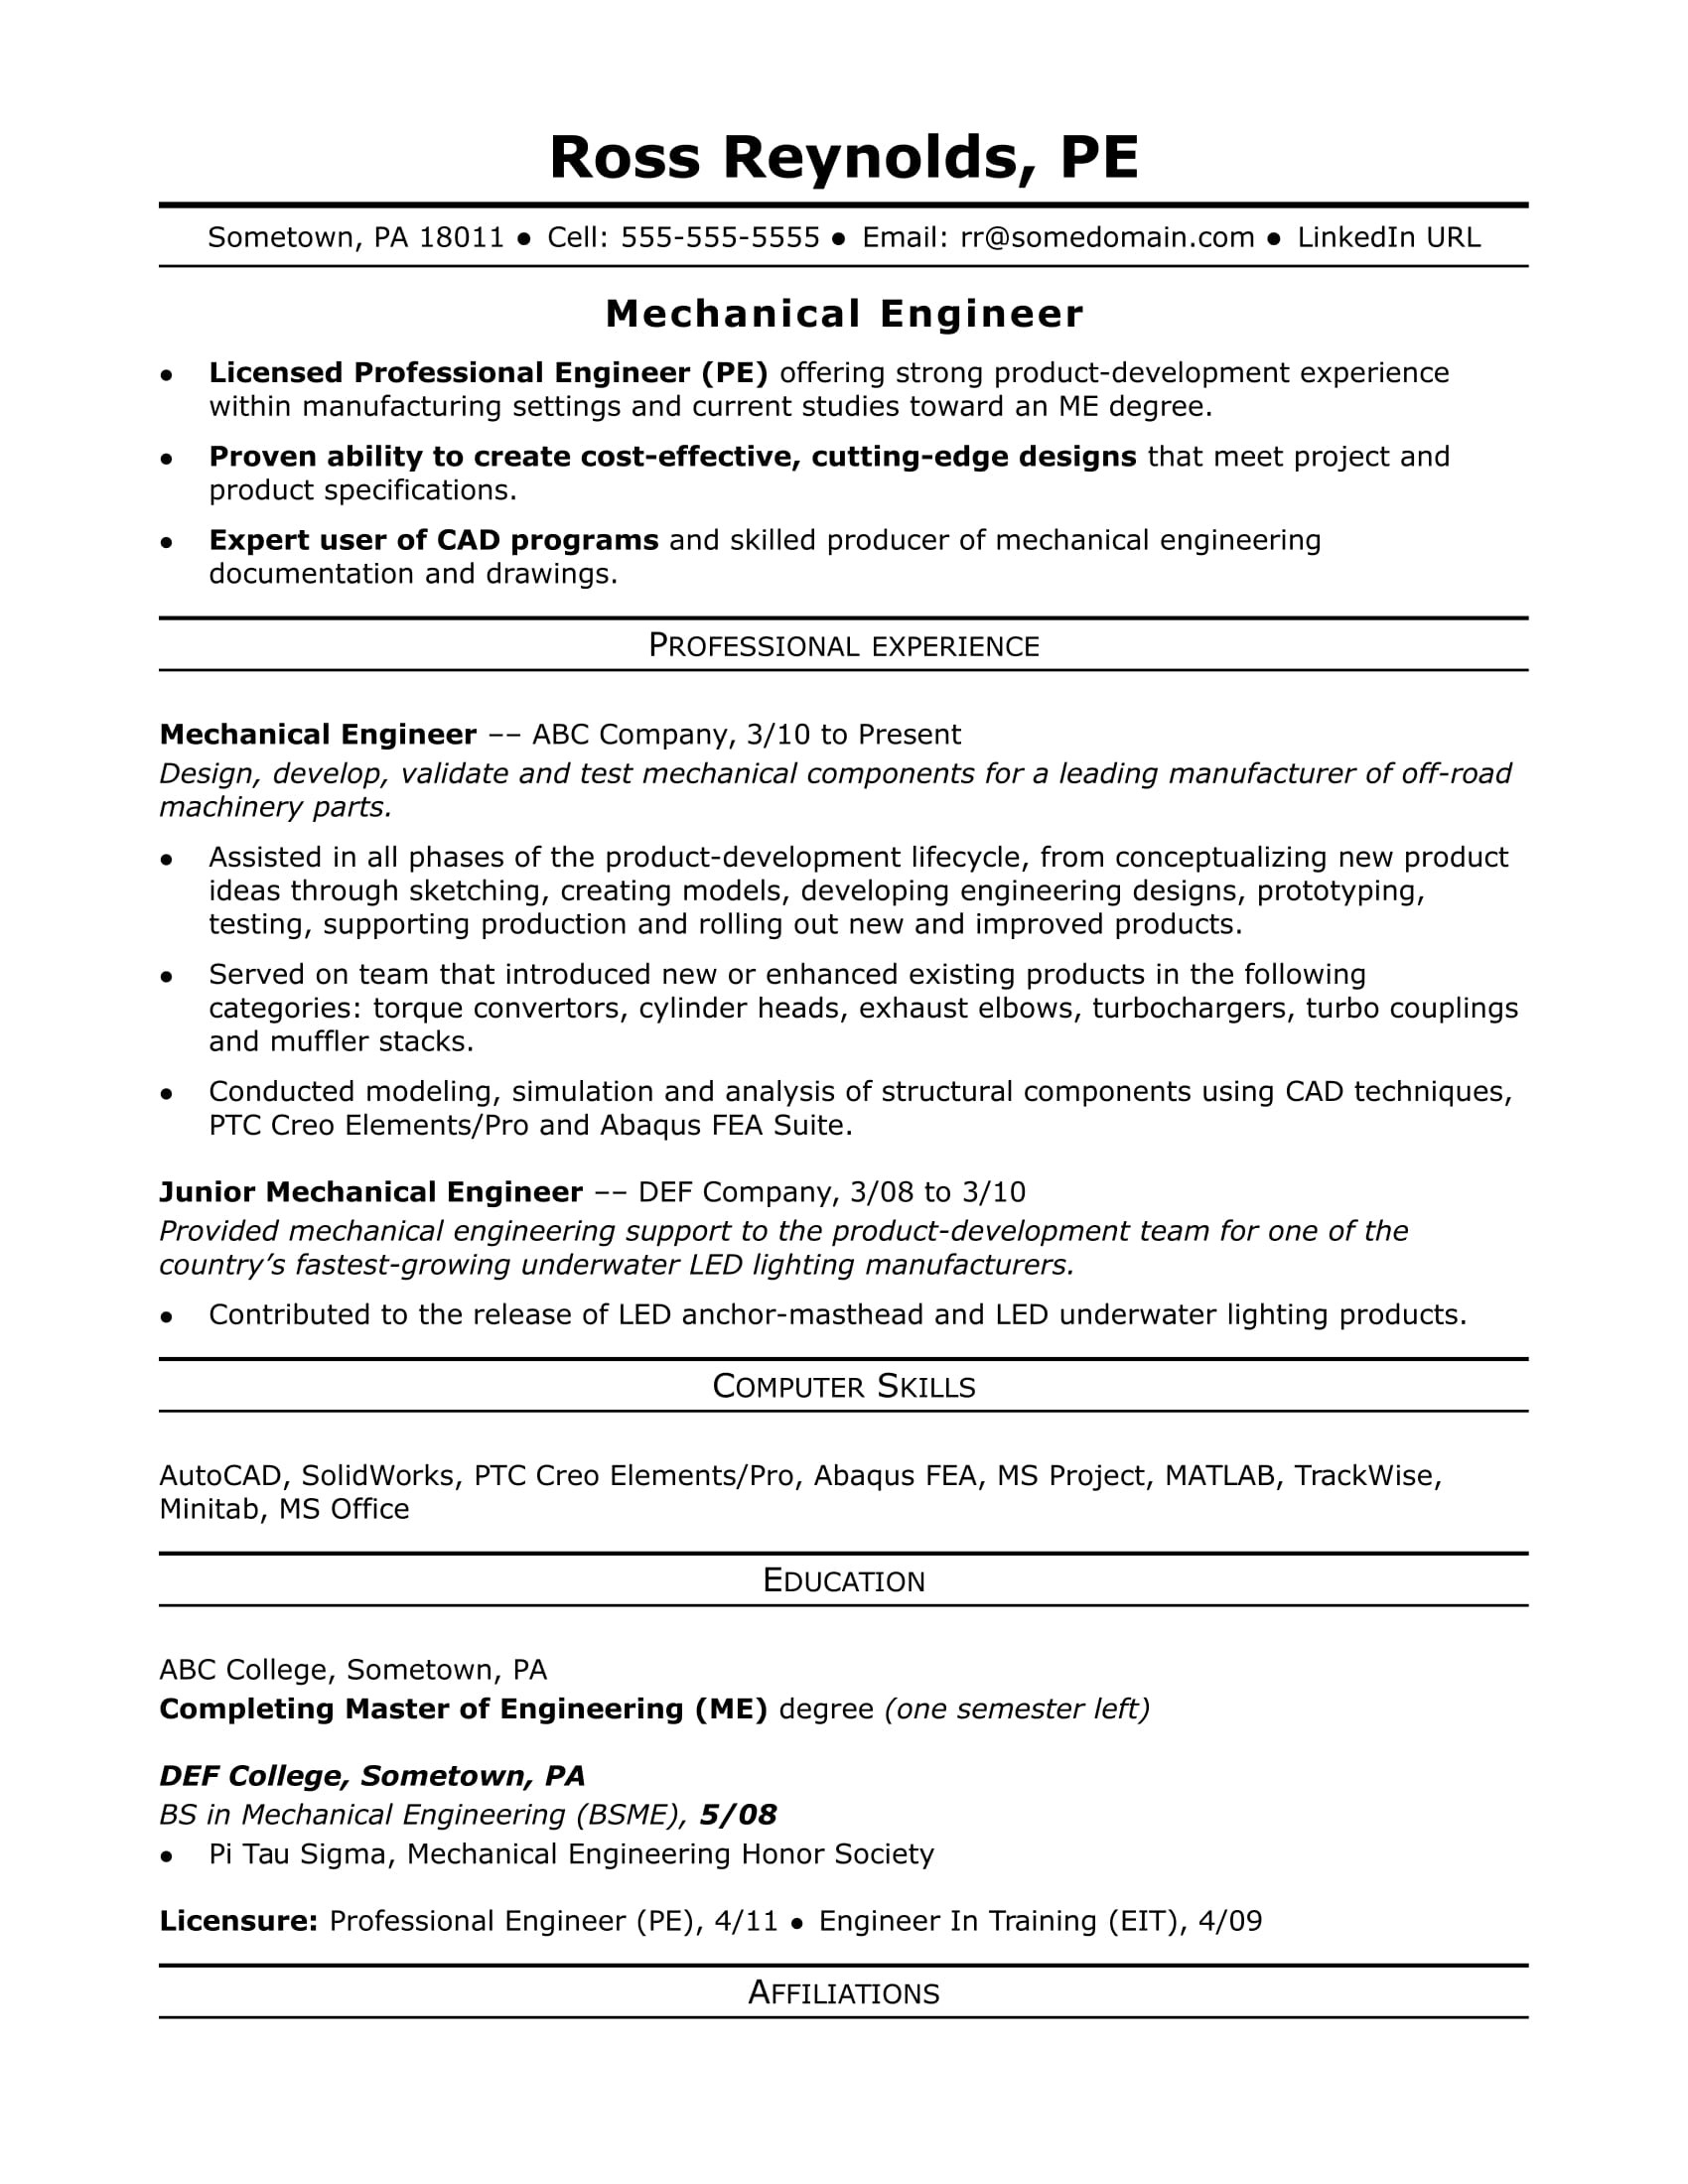 Build and Release Engineer Indeed Sample Resume Sample Resume for A Midlevel Mechanical Engineer Monster.com